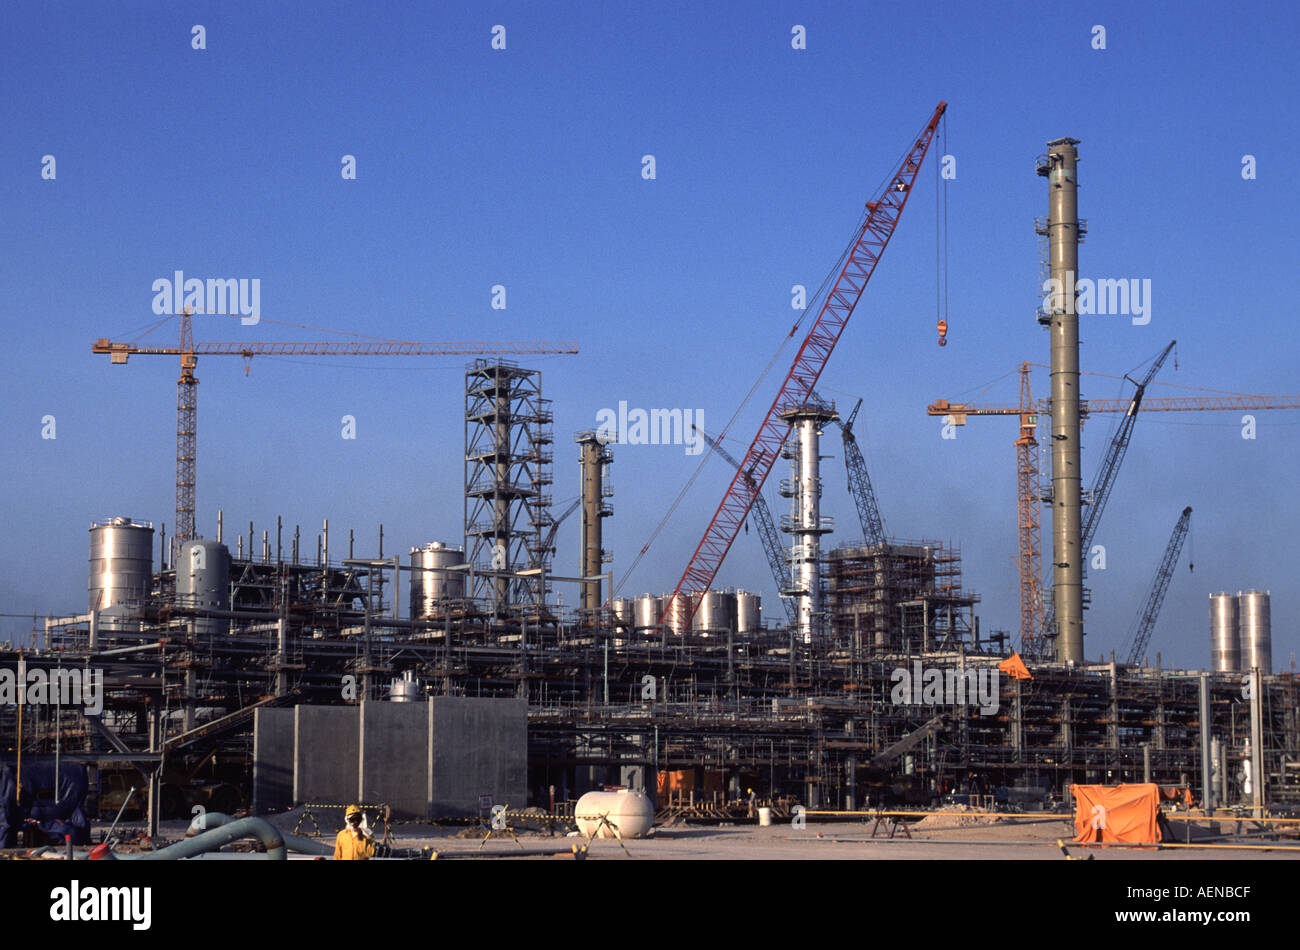 Construction of oil or gas refinery in Arab Gulf state of Qatar Stock Photo